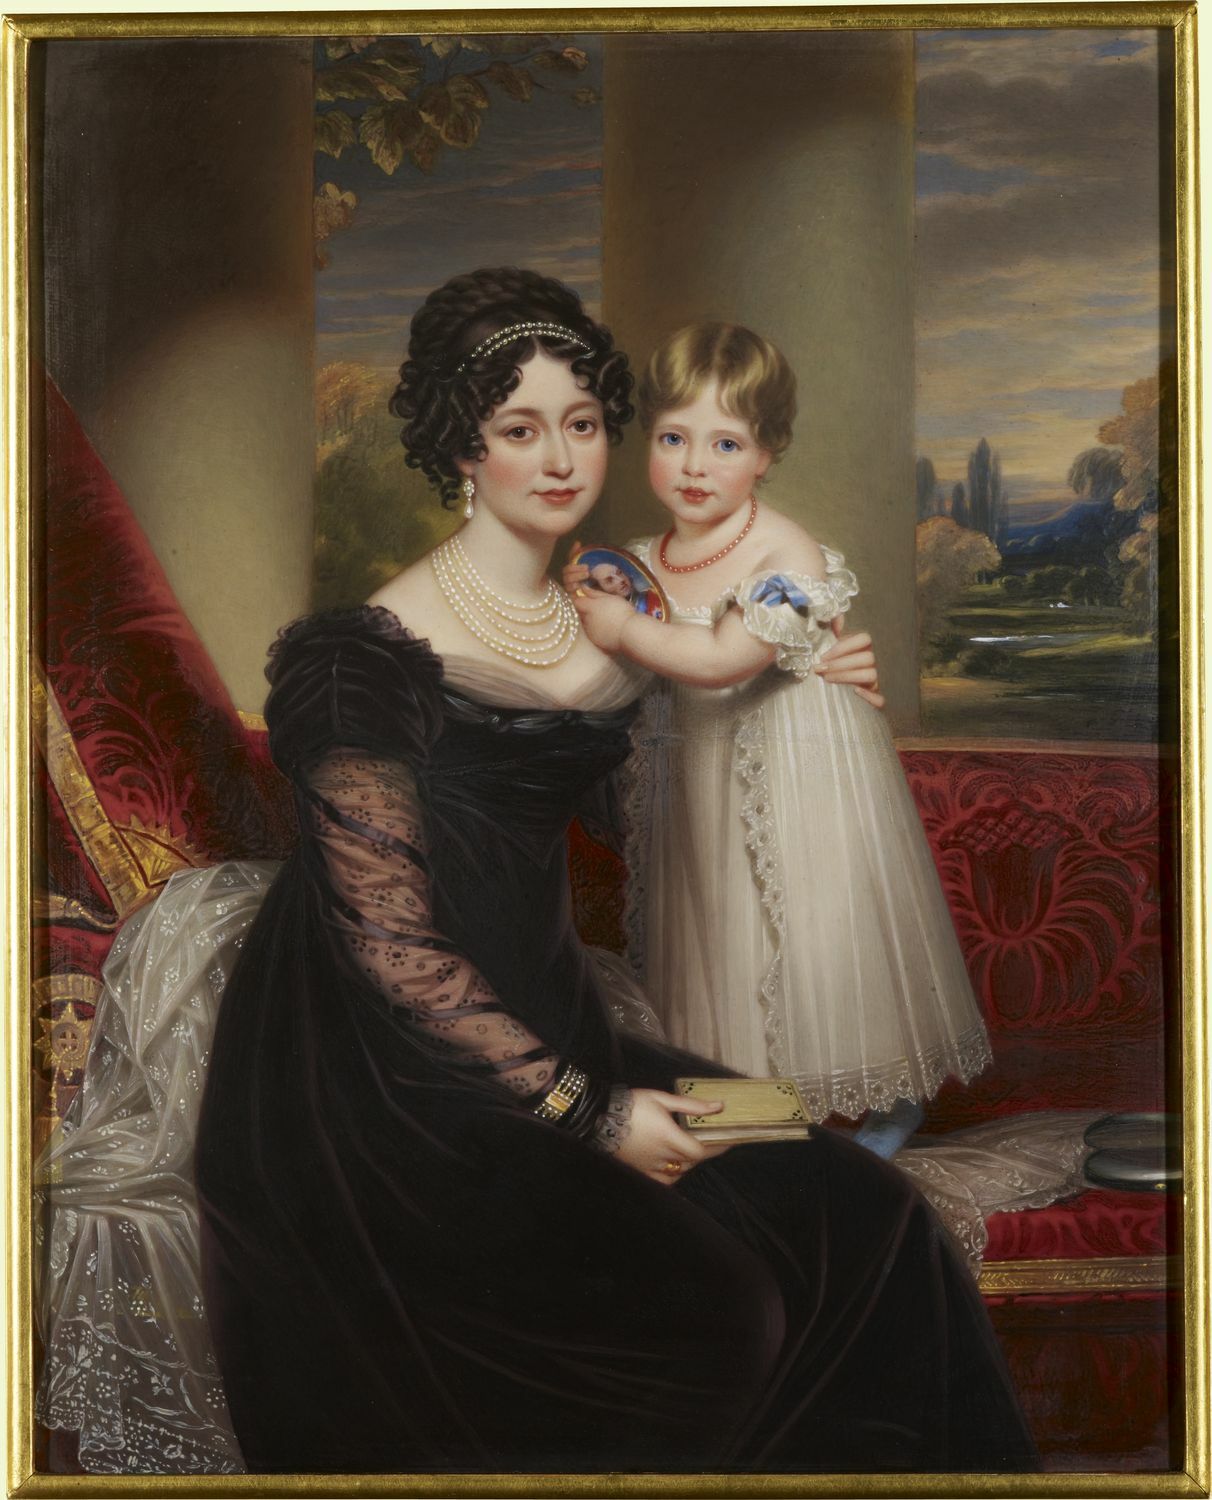 Victoria, Duchess of Kent with Princess Victoria, c.1824. Royal Collections Trust. No known copyright